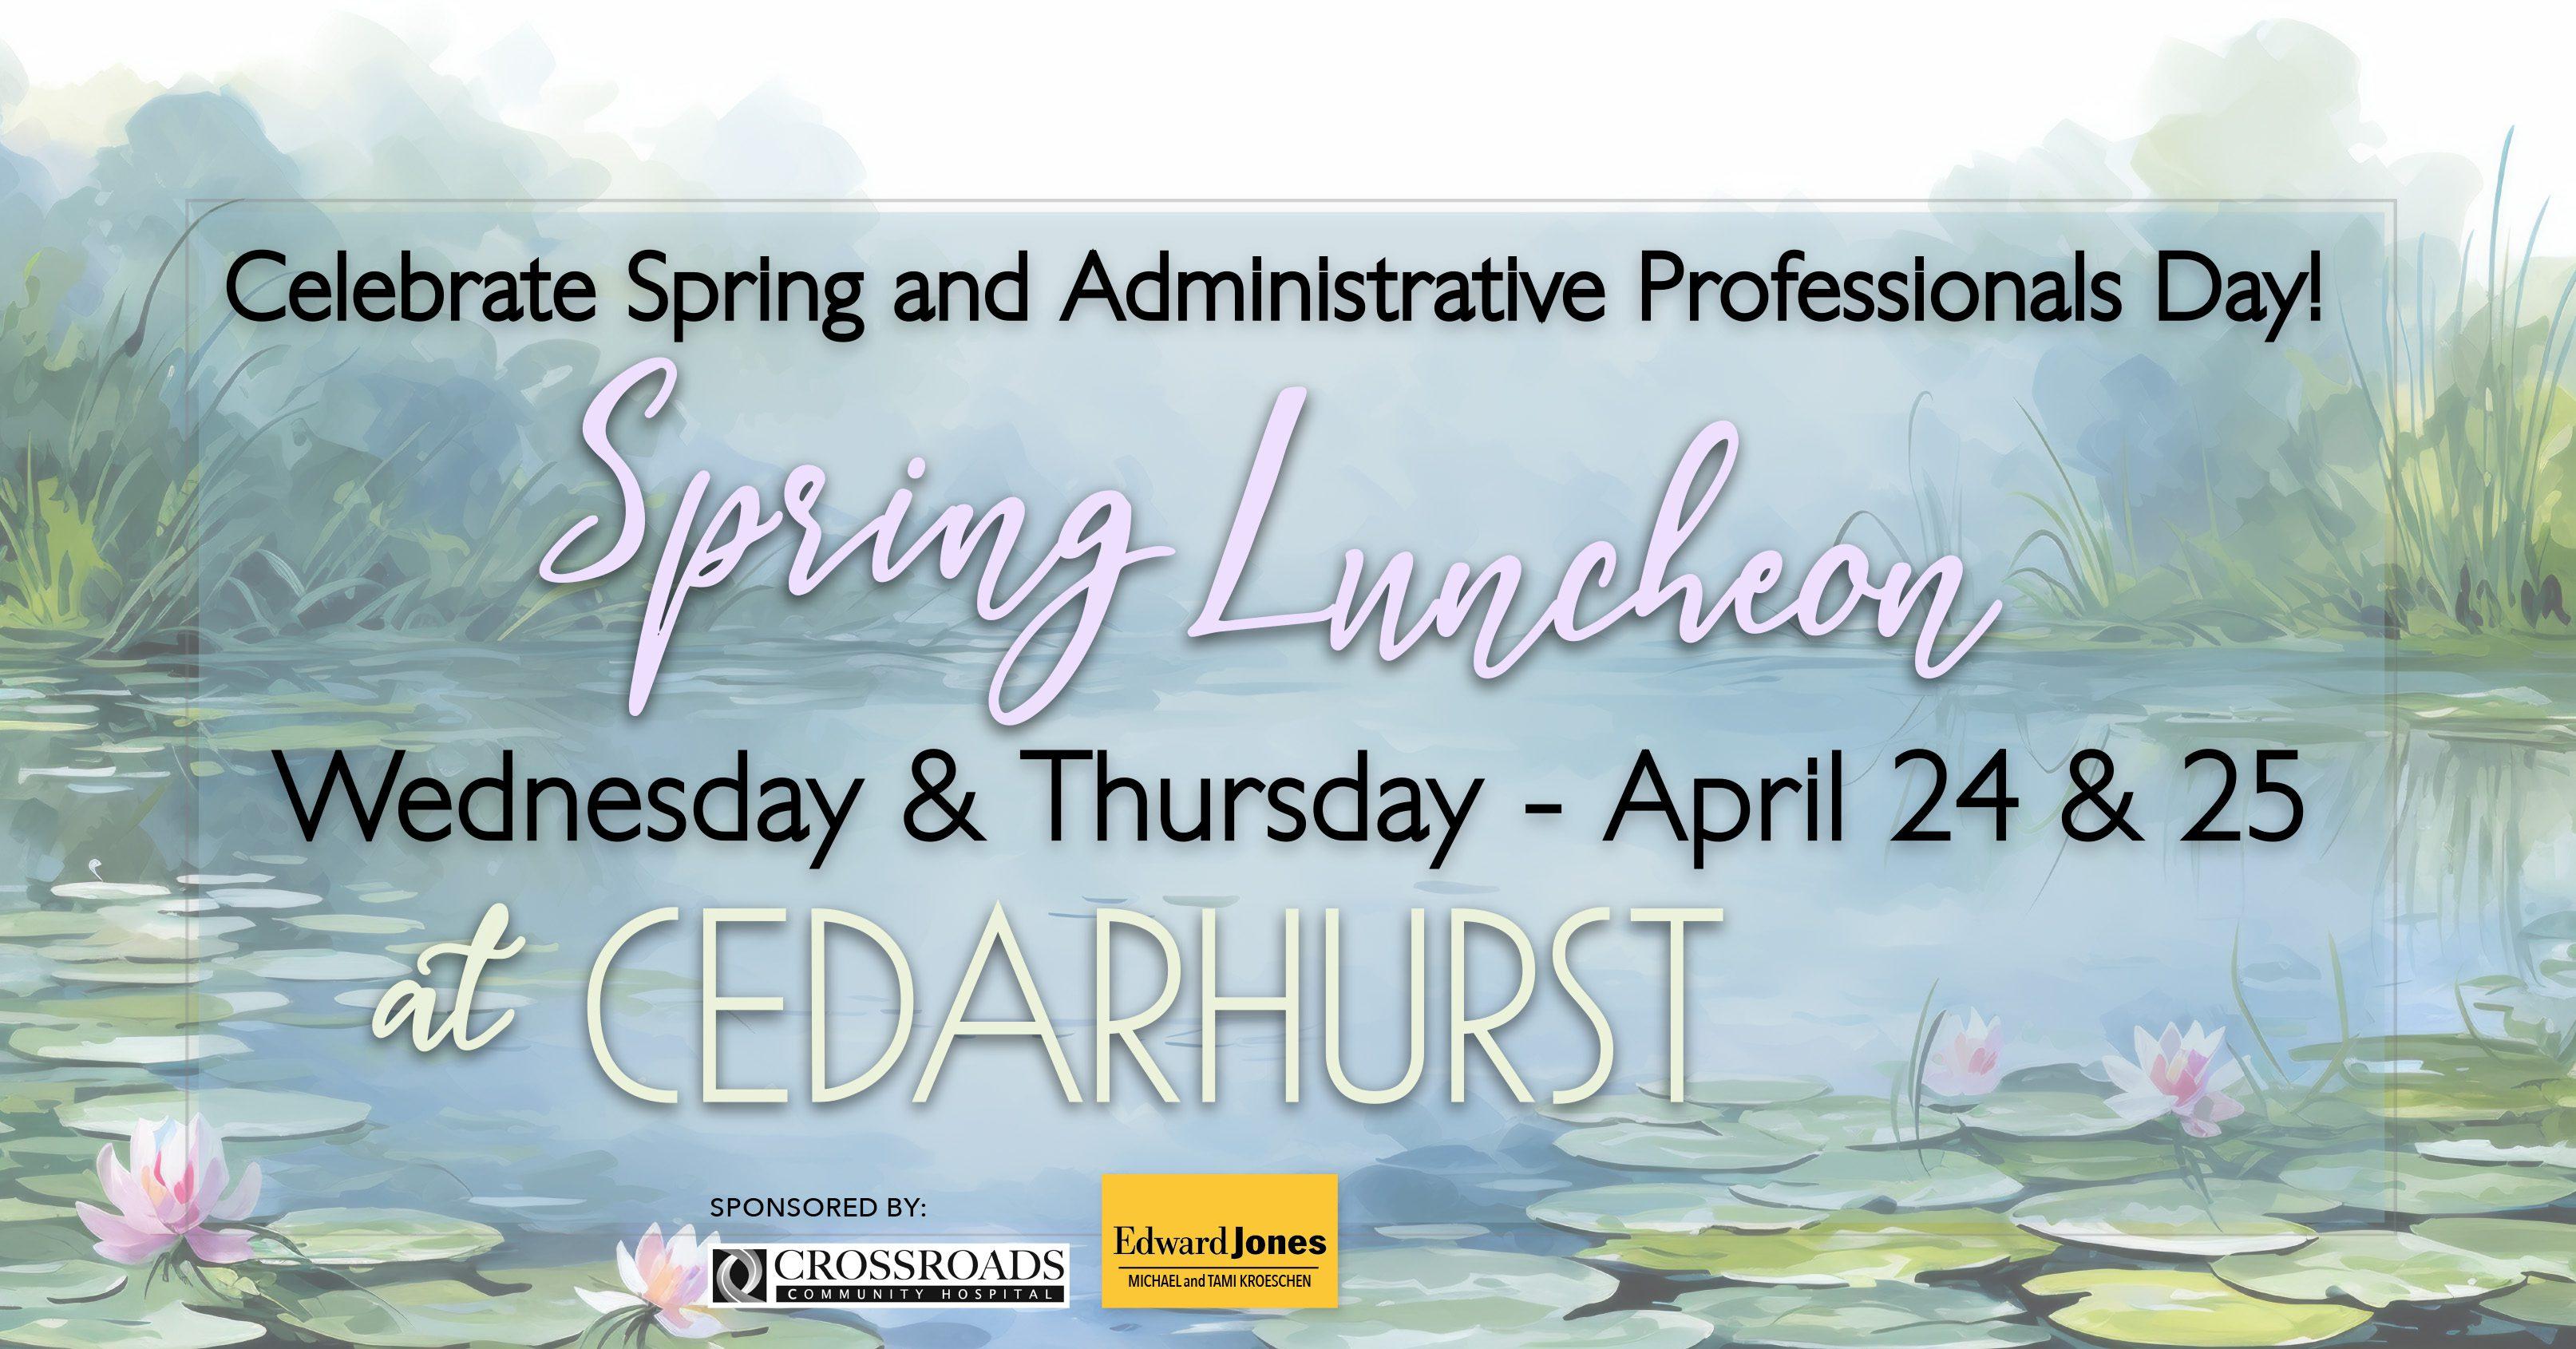 Spring Luncheon Wednesday & Thursday April 24 & 25